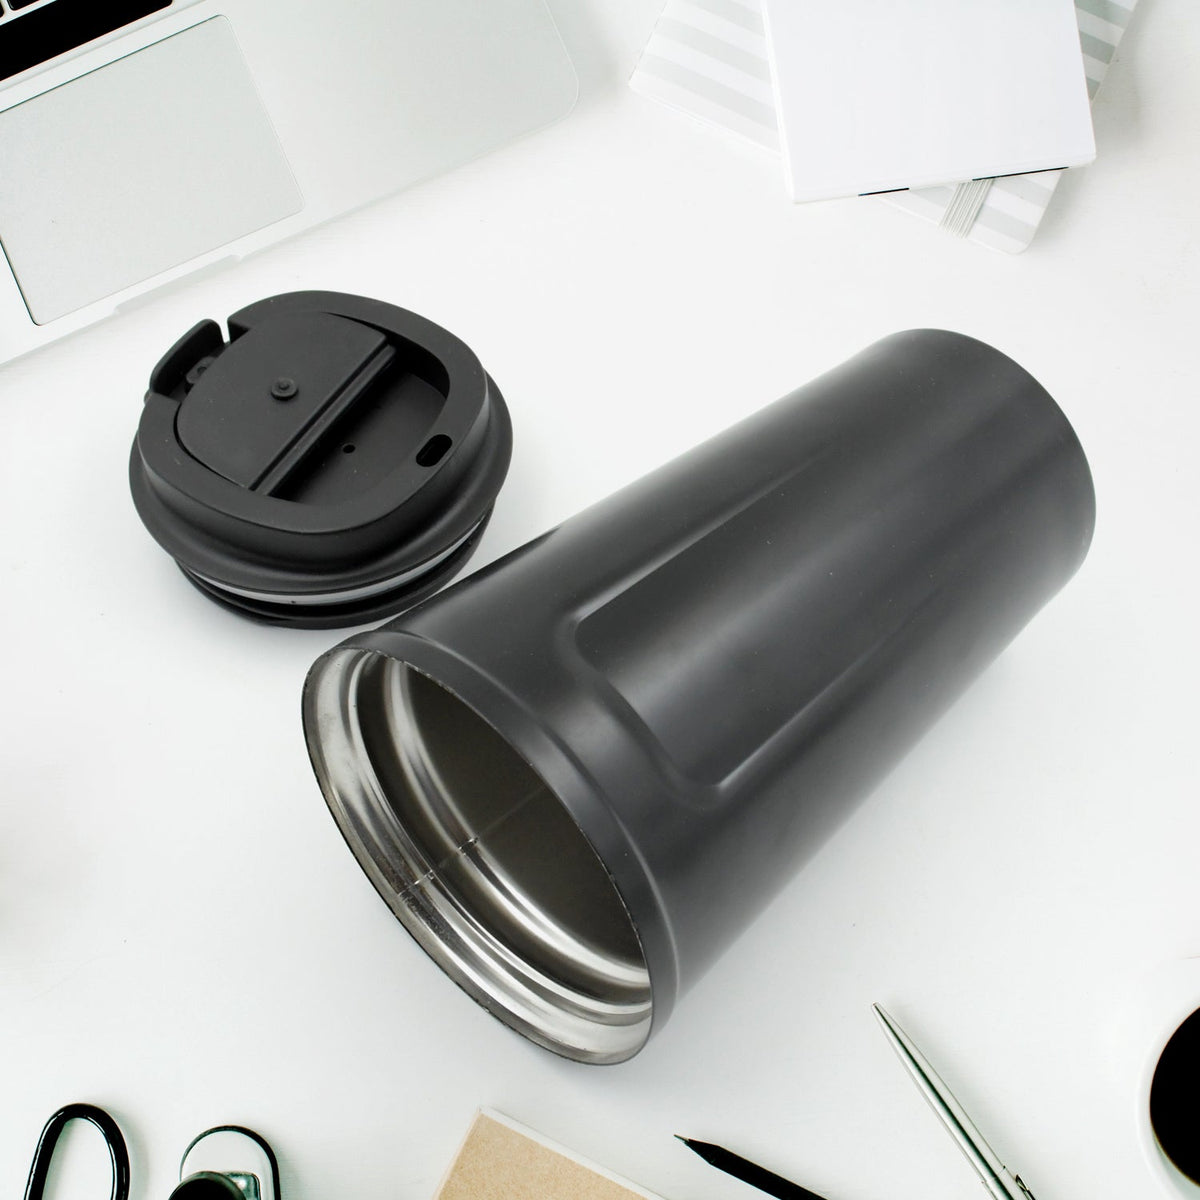 12512 Inside Stainless Steel & Outside Plastic Vacuum Insulated  Insulated Coffee Cups Double Walled Travel Mug, Car Coffee Mug with Leak Proof Lid Reusable Thermal Cup for Hot Cold Drinks Coffee, Tea (1 Pc)